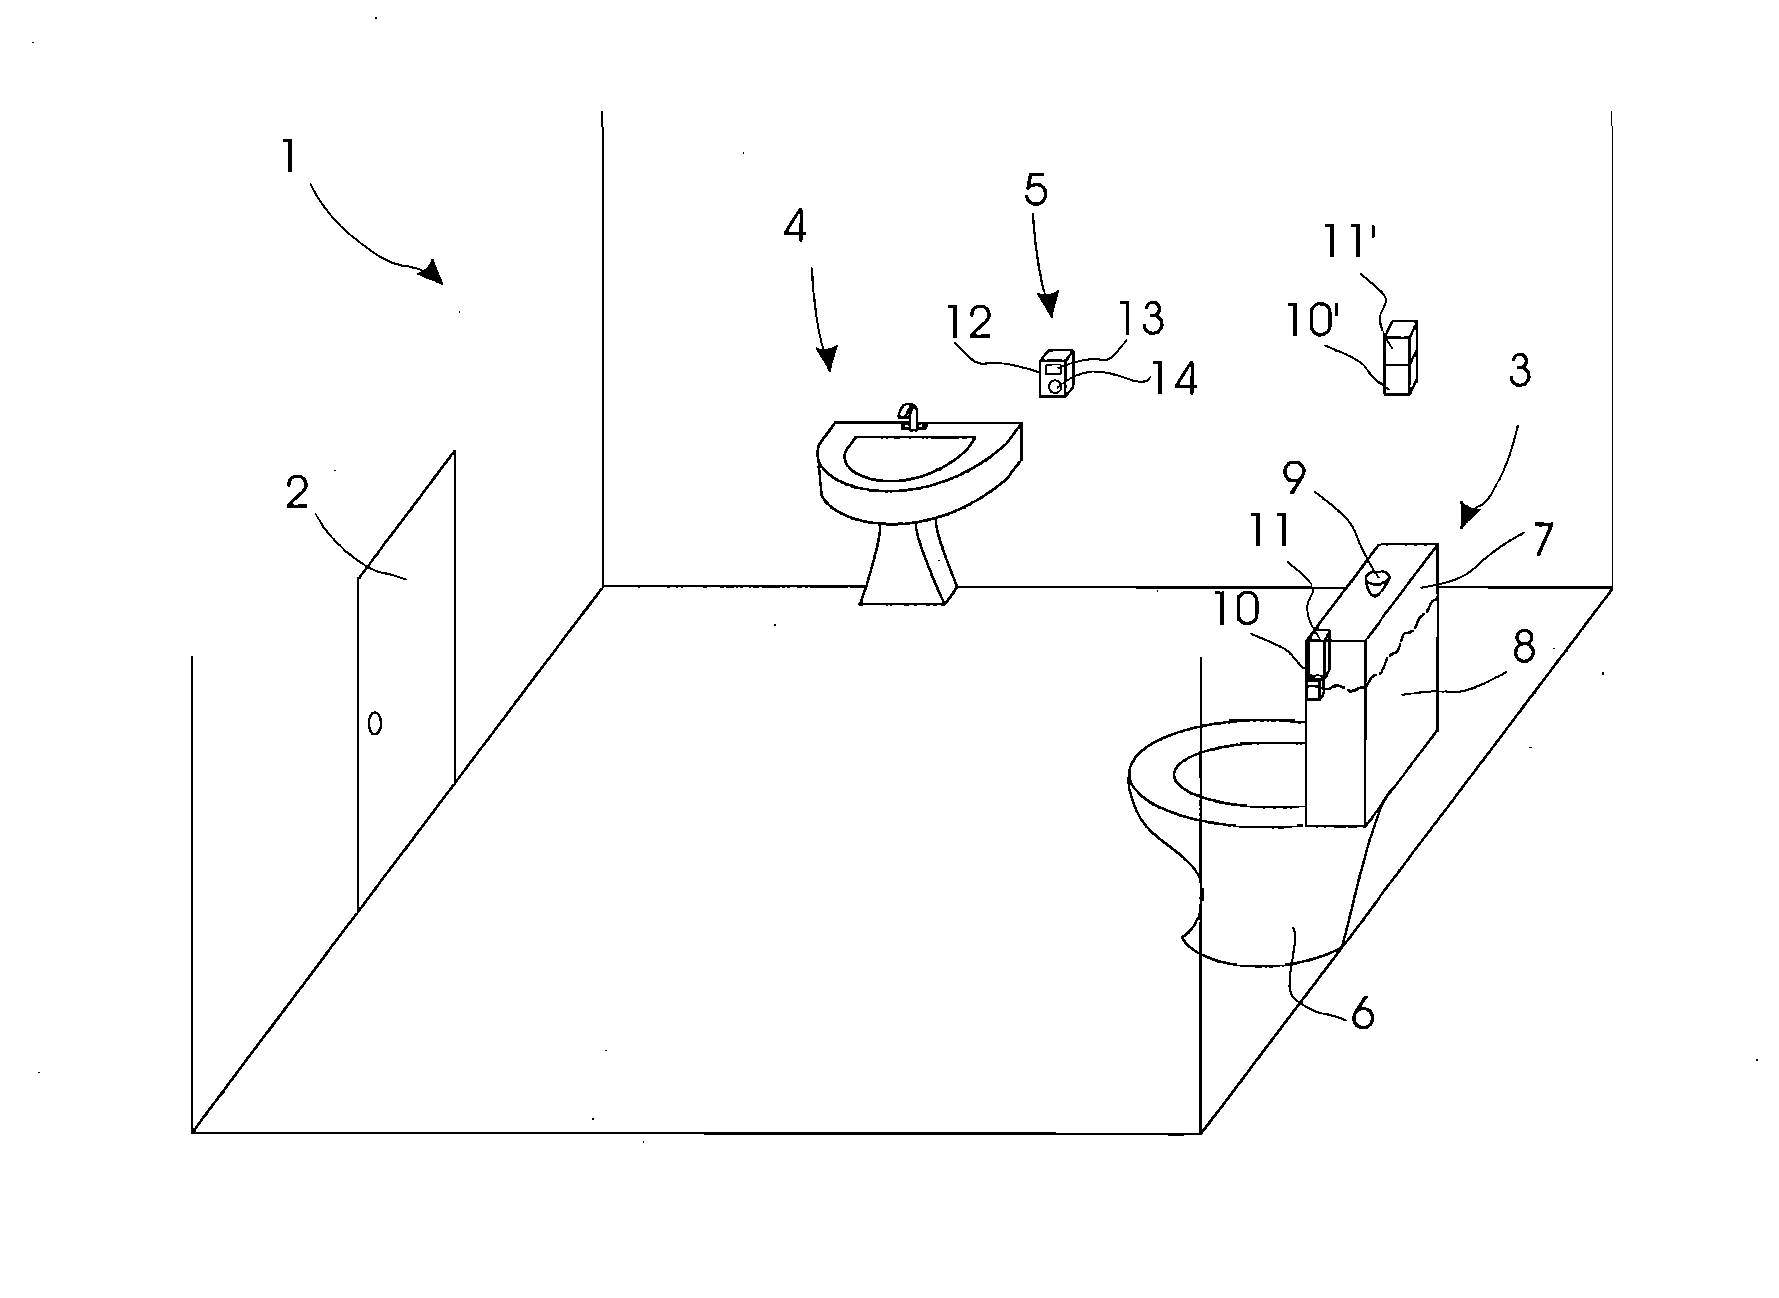 System and method for motivating or prompting hand washing